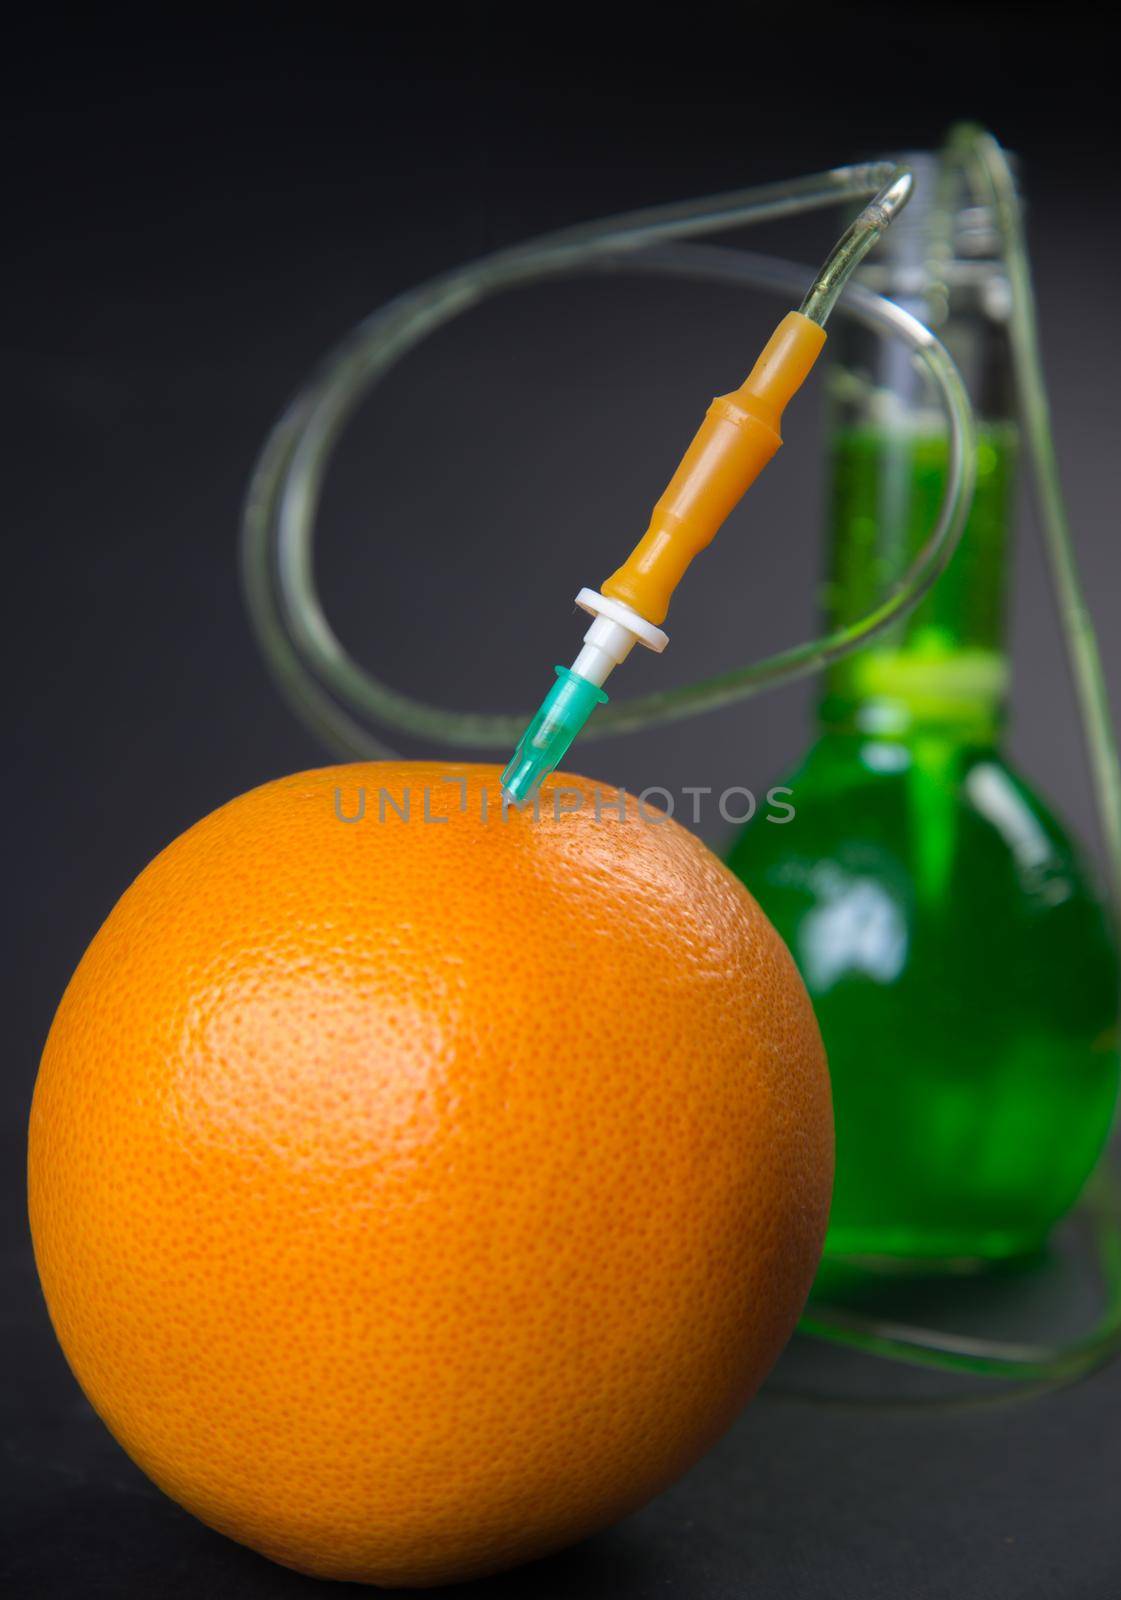 Green liquid in the drop counter injected into grapefruit on a black background